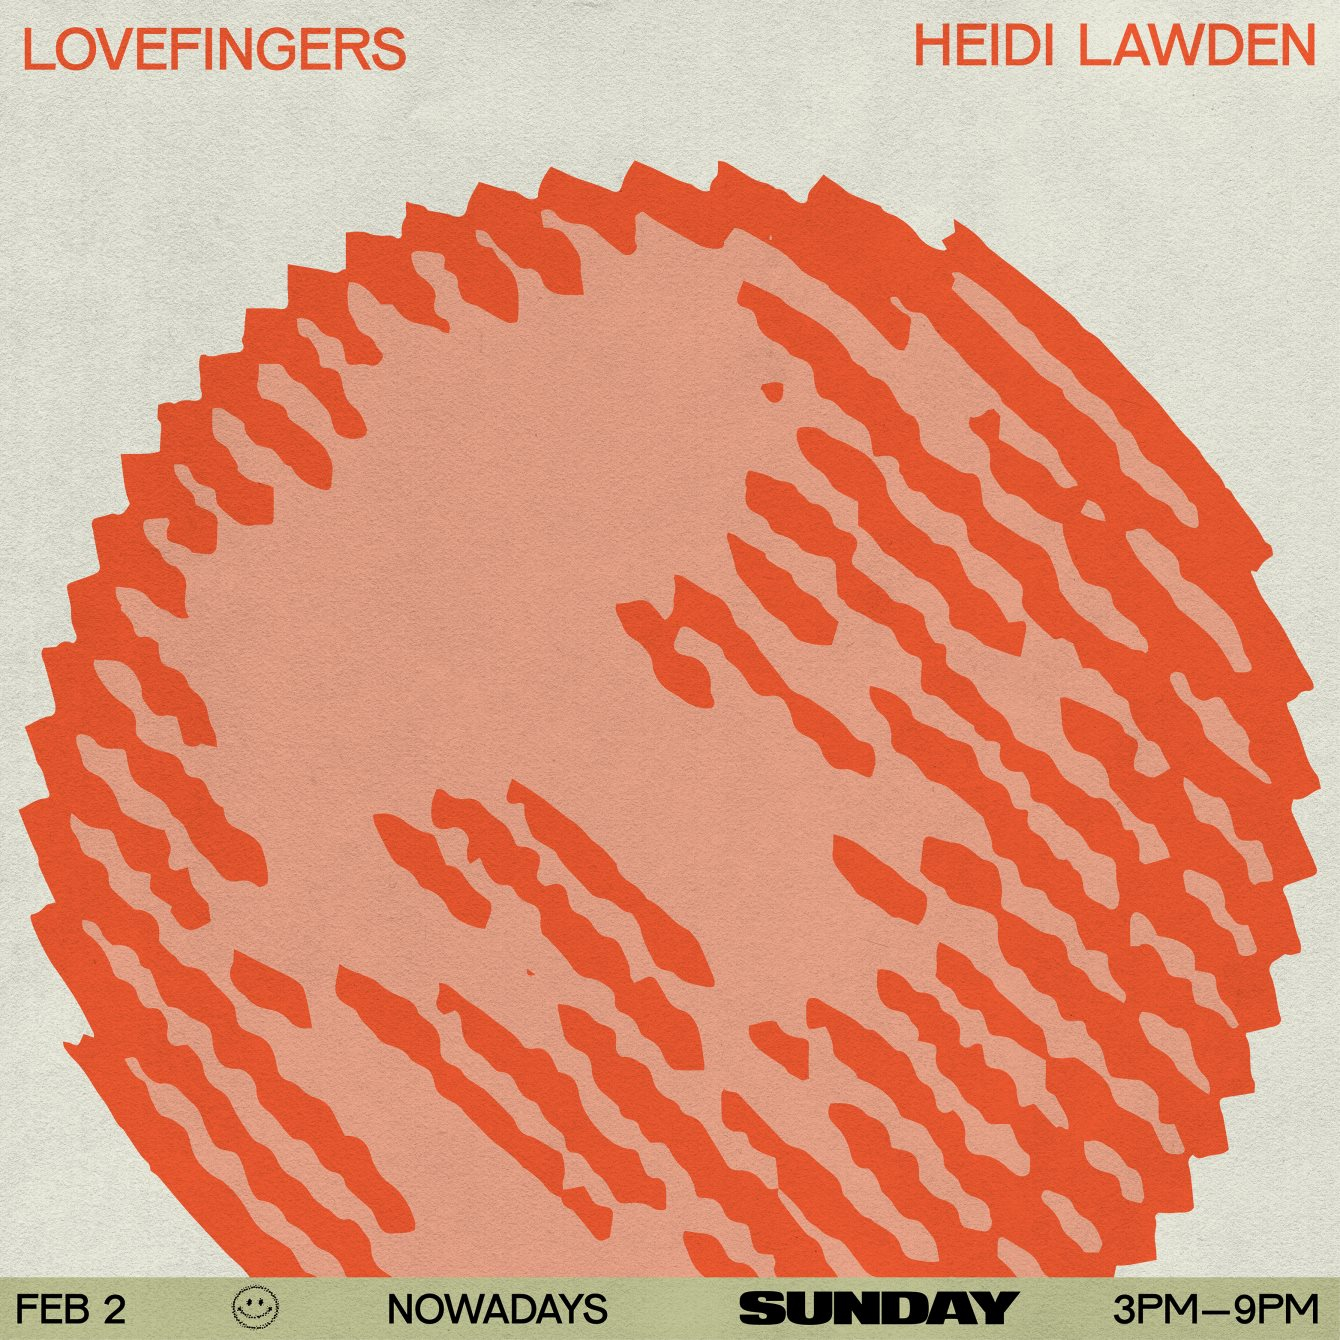 Sunday: Lovefingers and Heidi Lawden - Flyer back